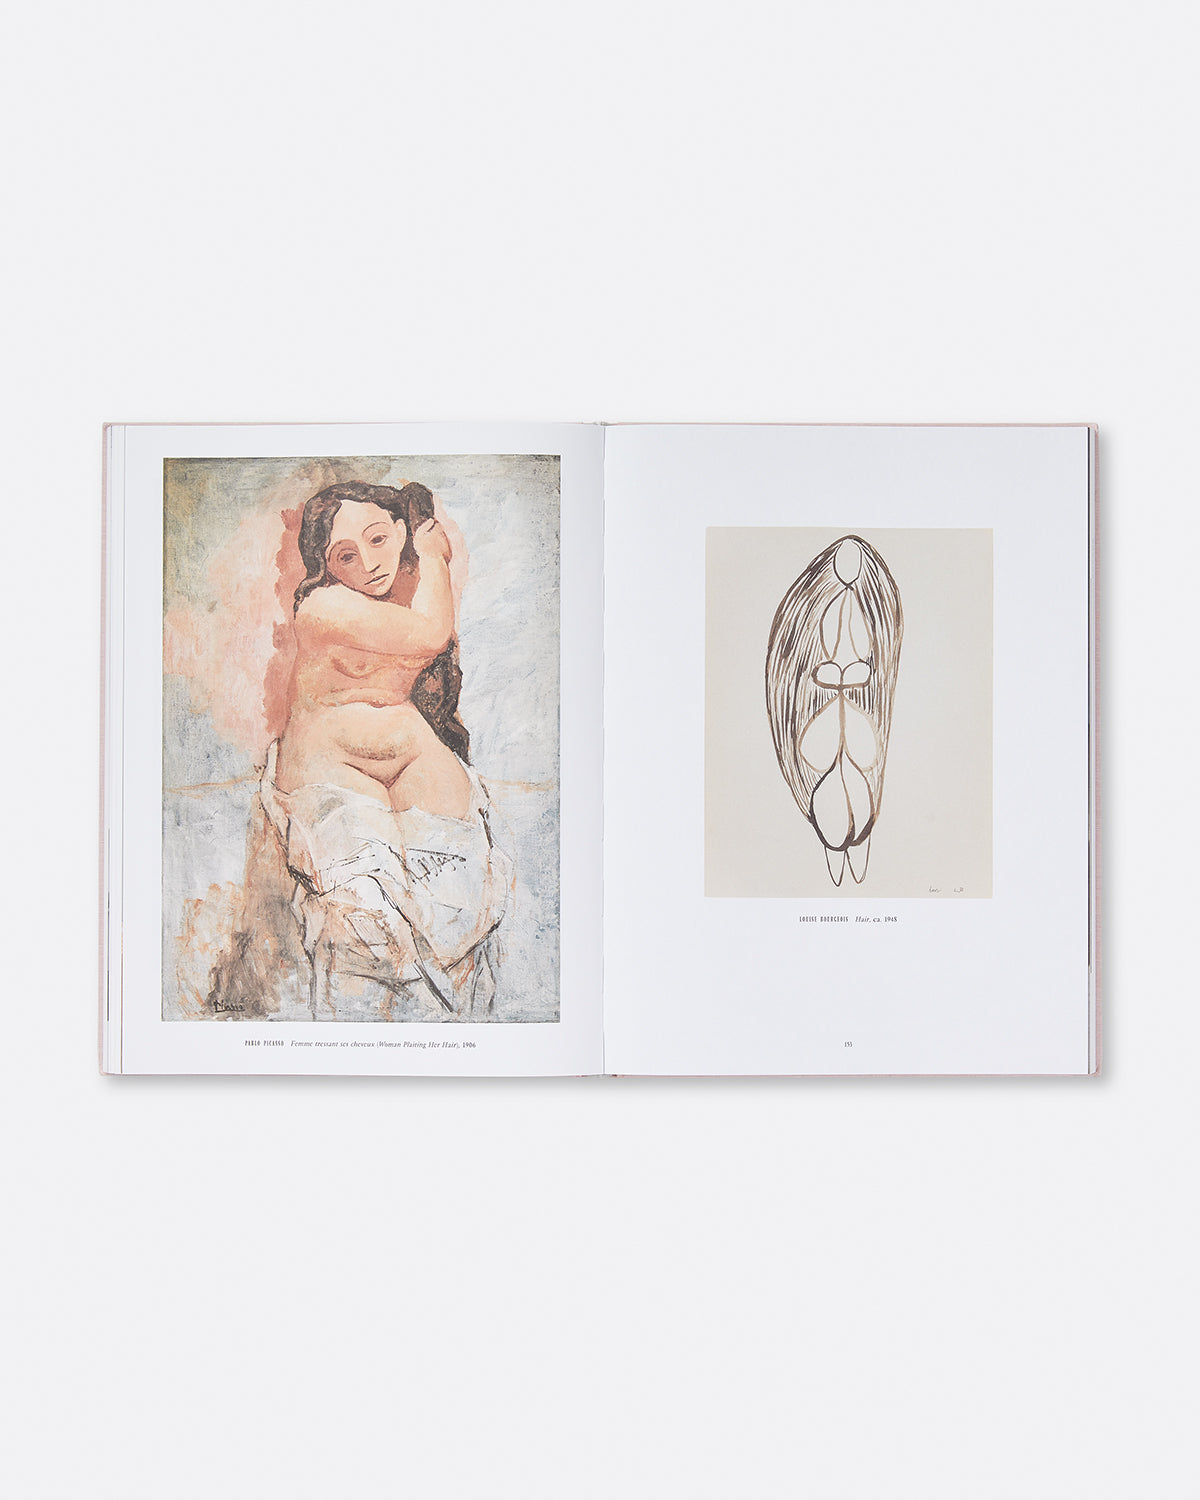 Louise Bourgeois & Pablo Picasso: Anatomies of Desire Default Title